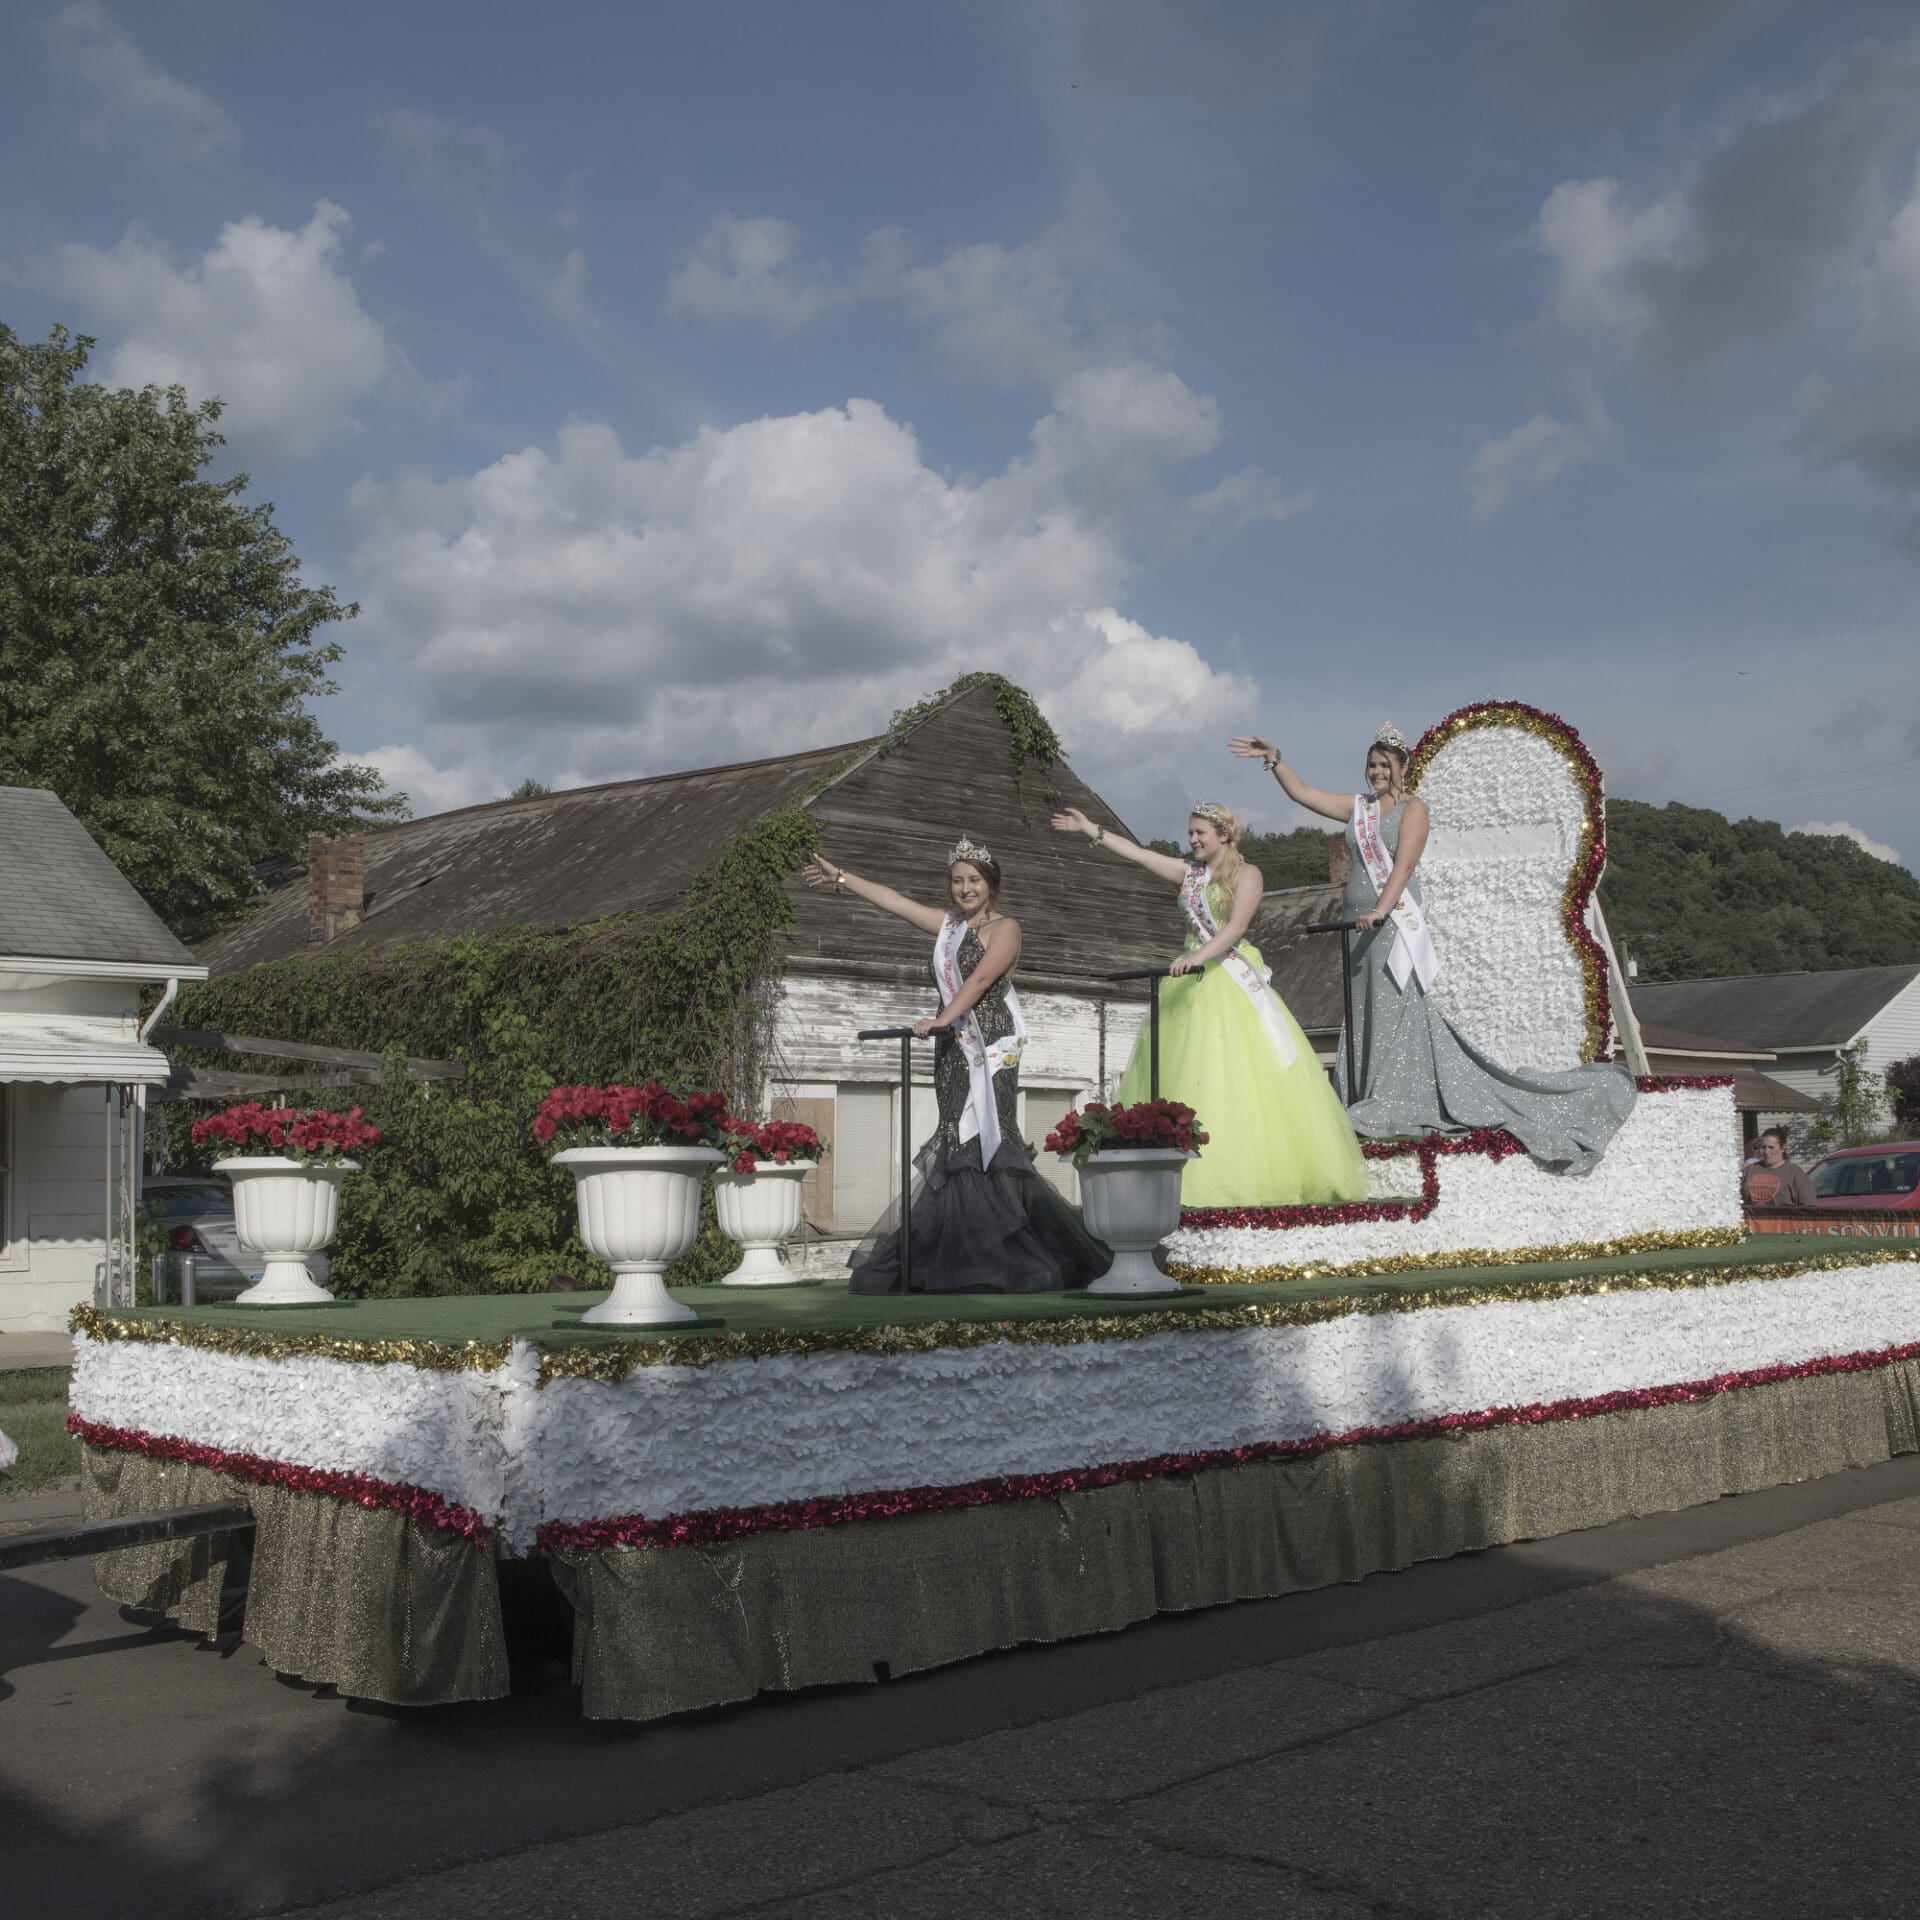 Photographer Rich-Joseph Facun | A beauty pageant in Nelsonville, with a float topped by three beauty queens waving to the crowd